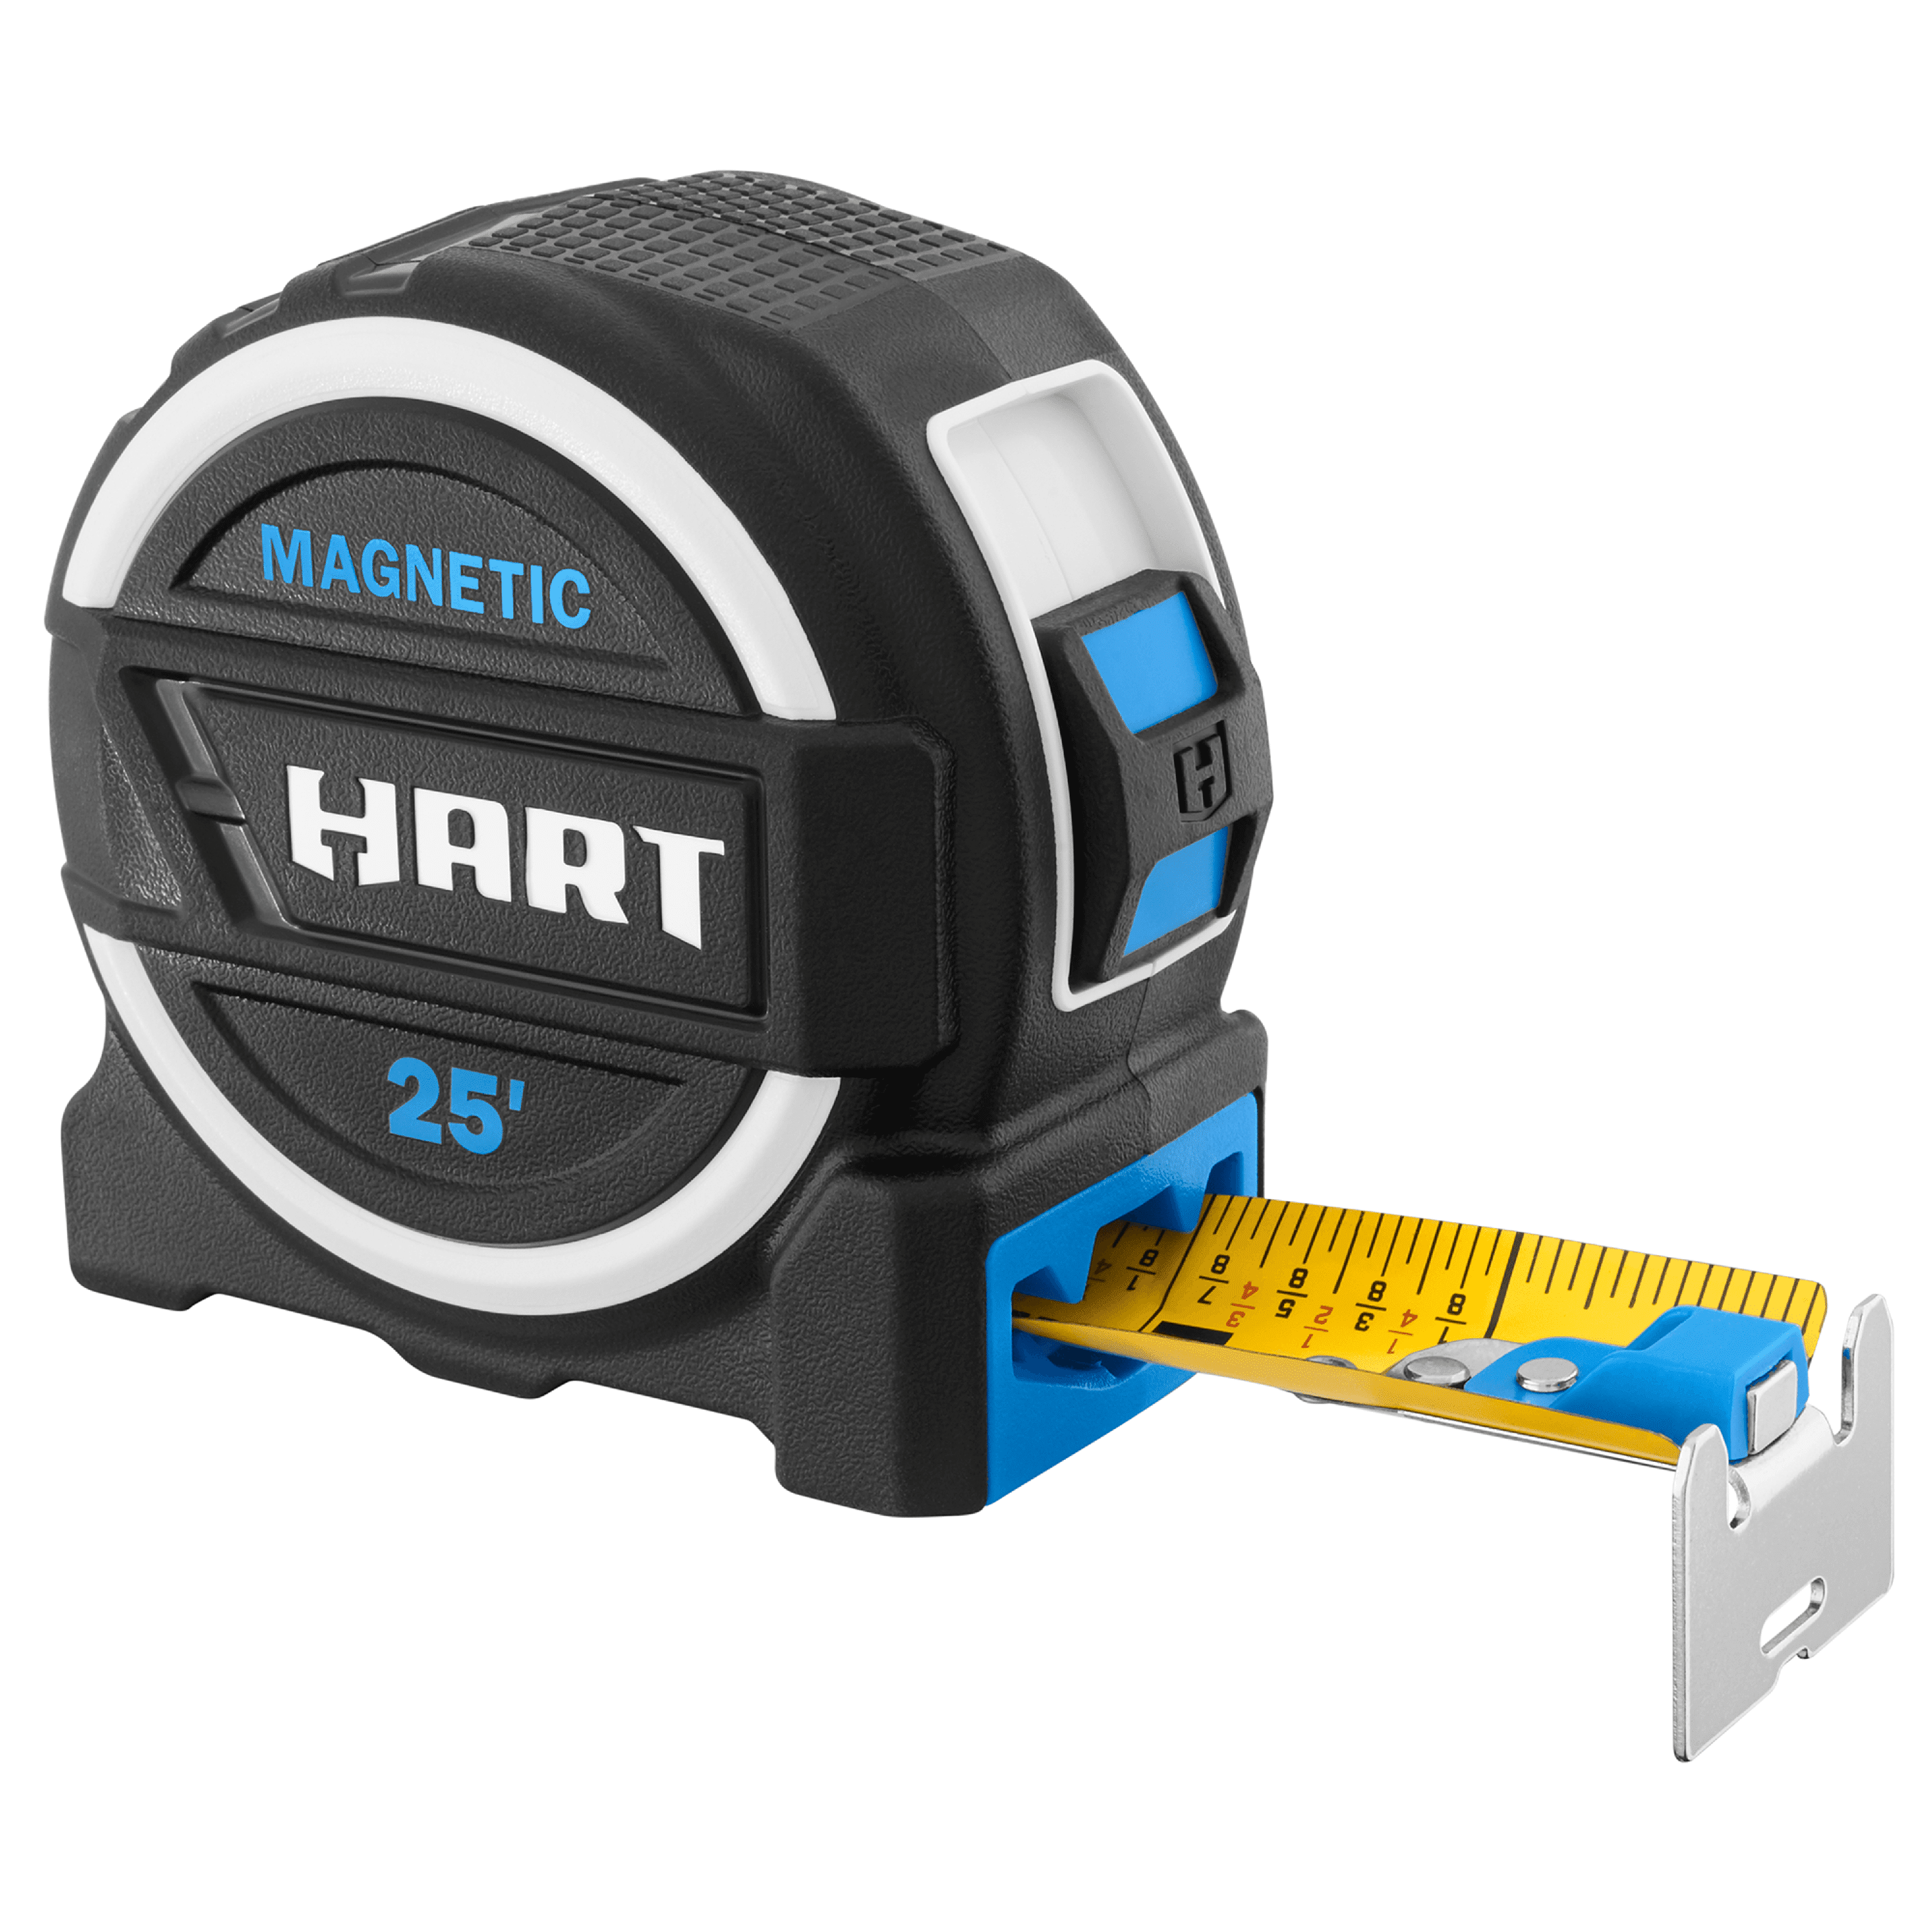 Tape Measure Markings: What Are They For? - Pro Tool Reviews